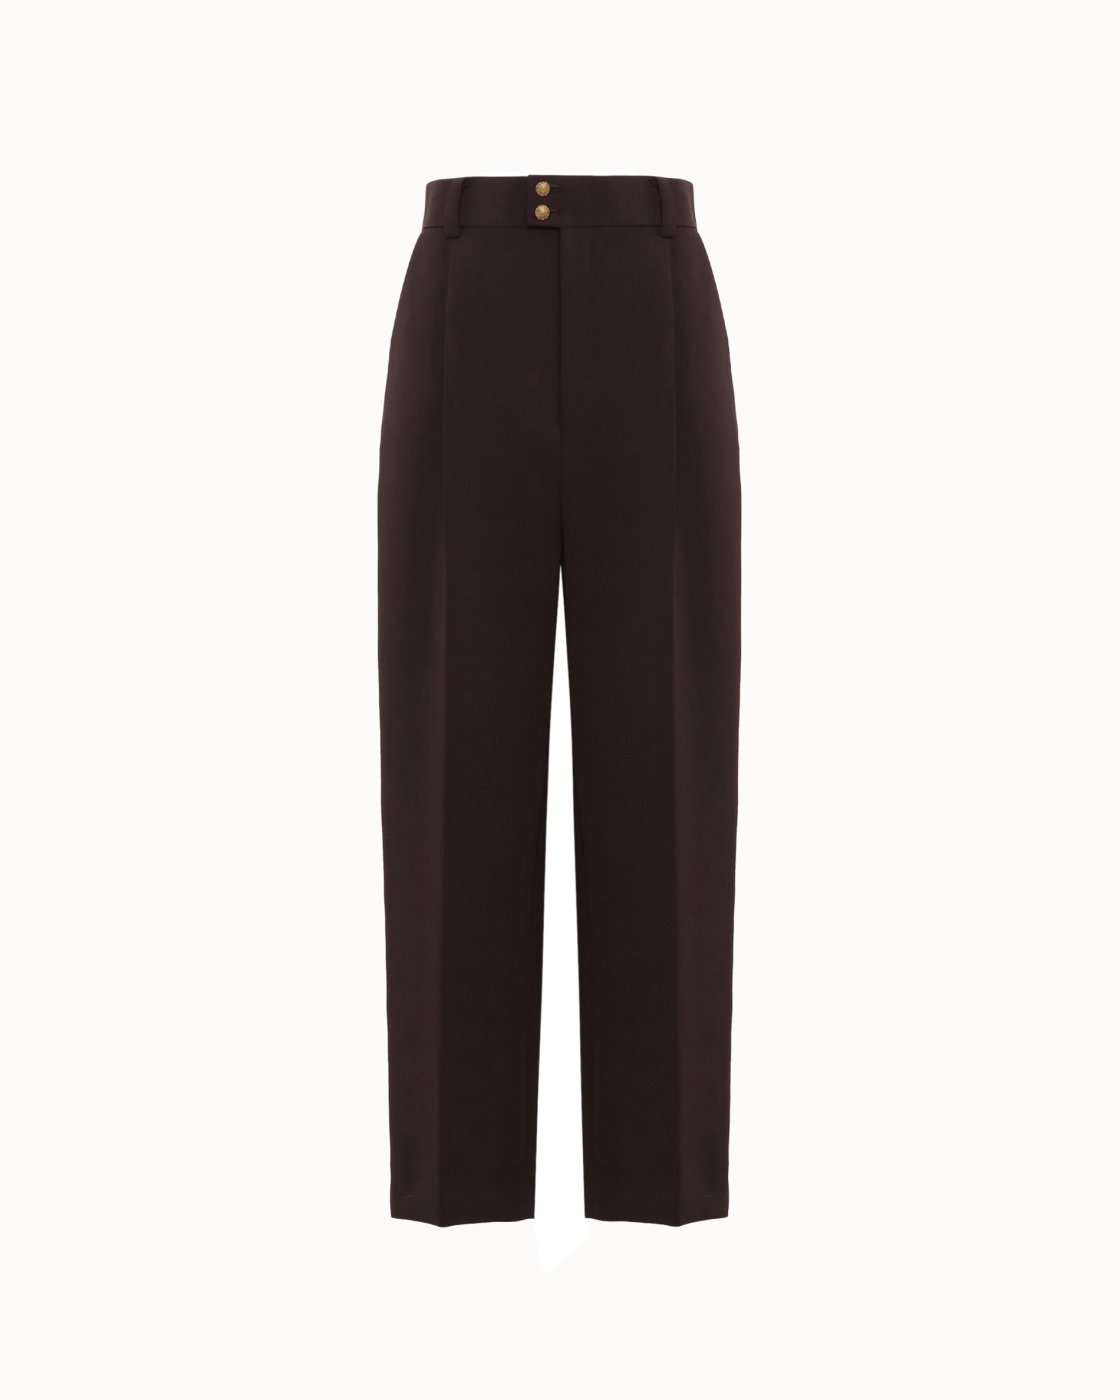 leur logette - <img class='new_mark_img1' src='https://img.shop-pro.jp/img/new/icons2.gif' style='border:none;display:inline;margin:0px;padding:0px;width:auto;' />Two-way Stretch Double Oxford Pants - Brown